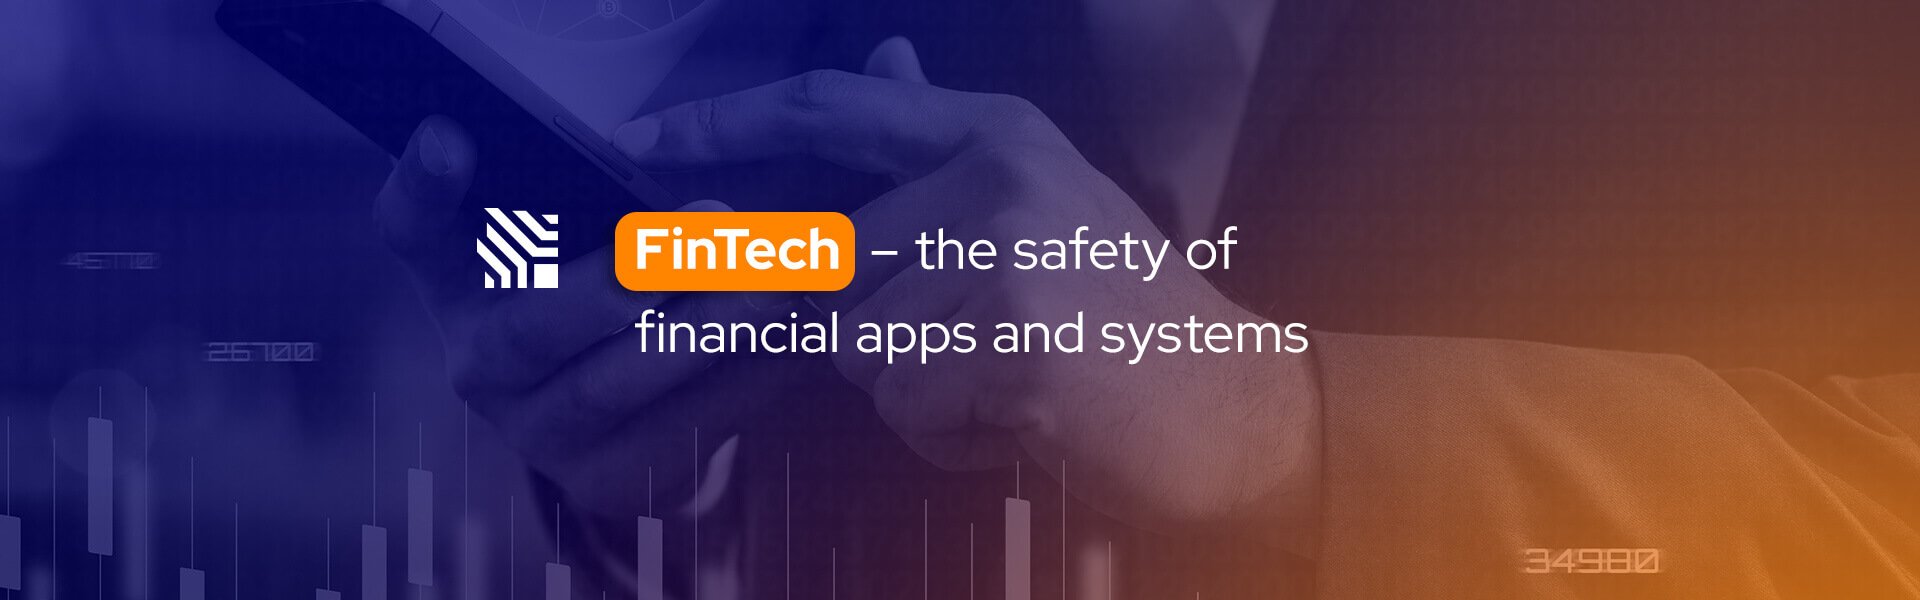 FinTech - the safety of financial apps and systems